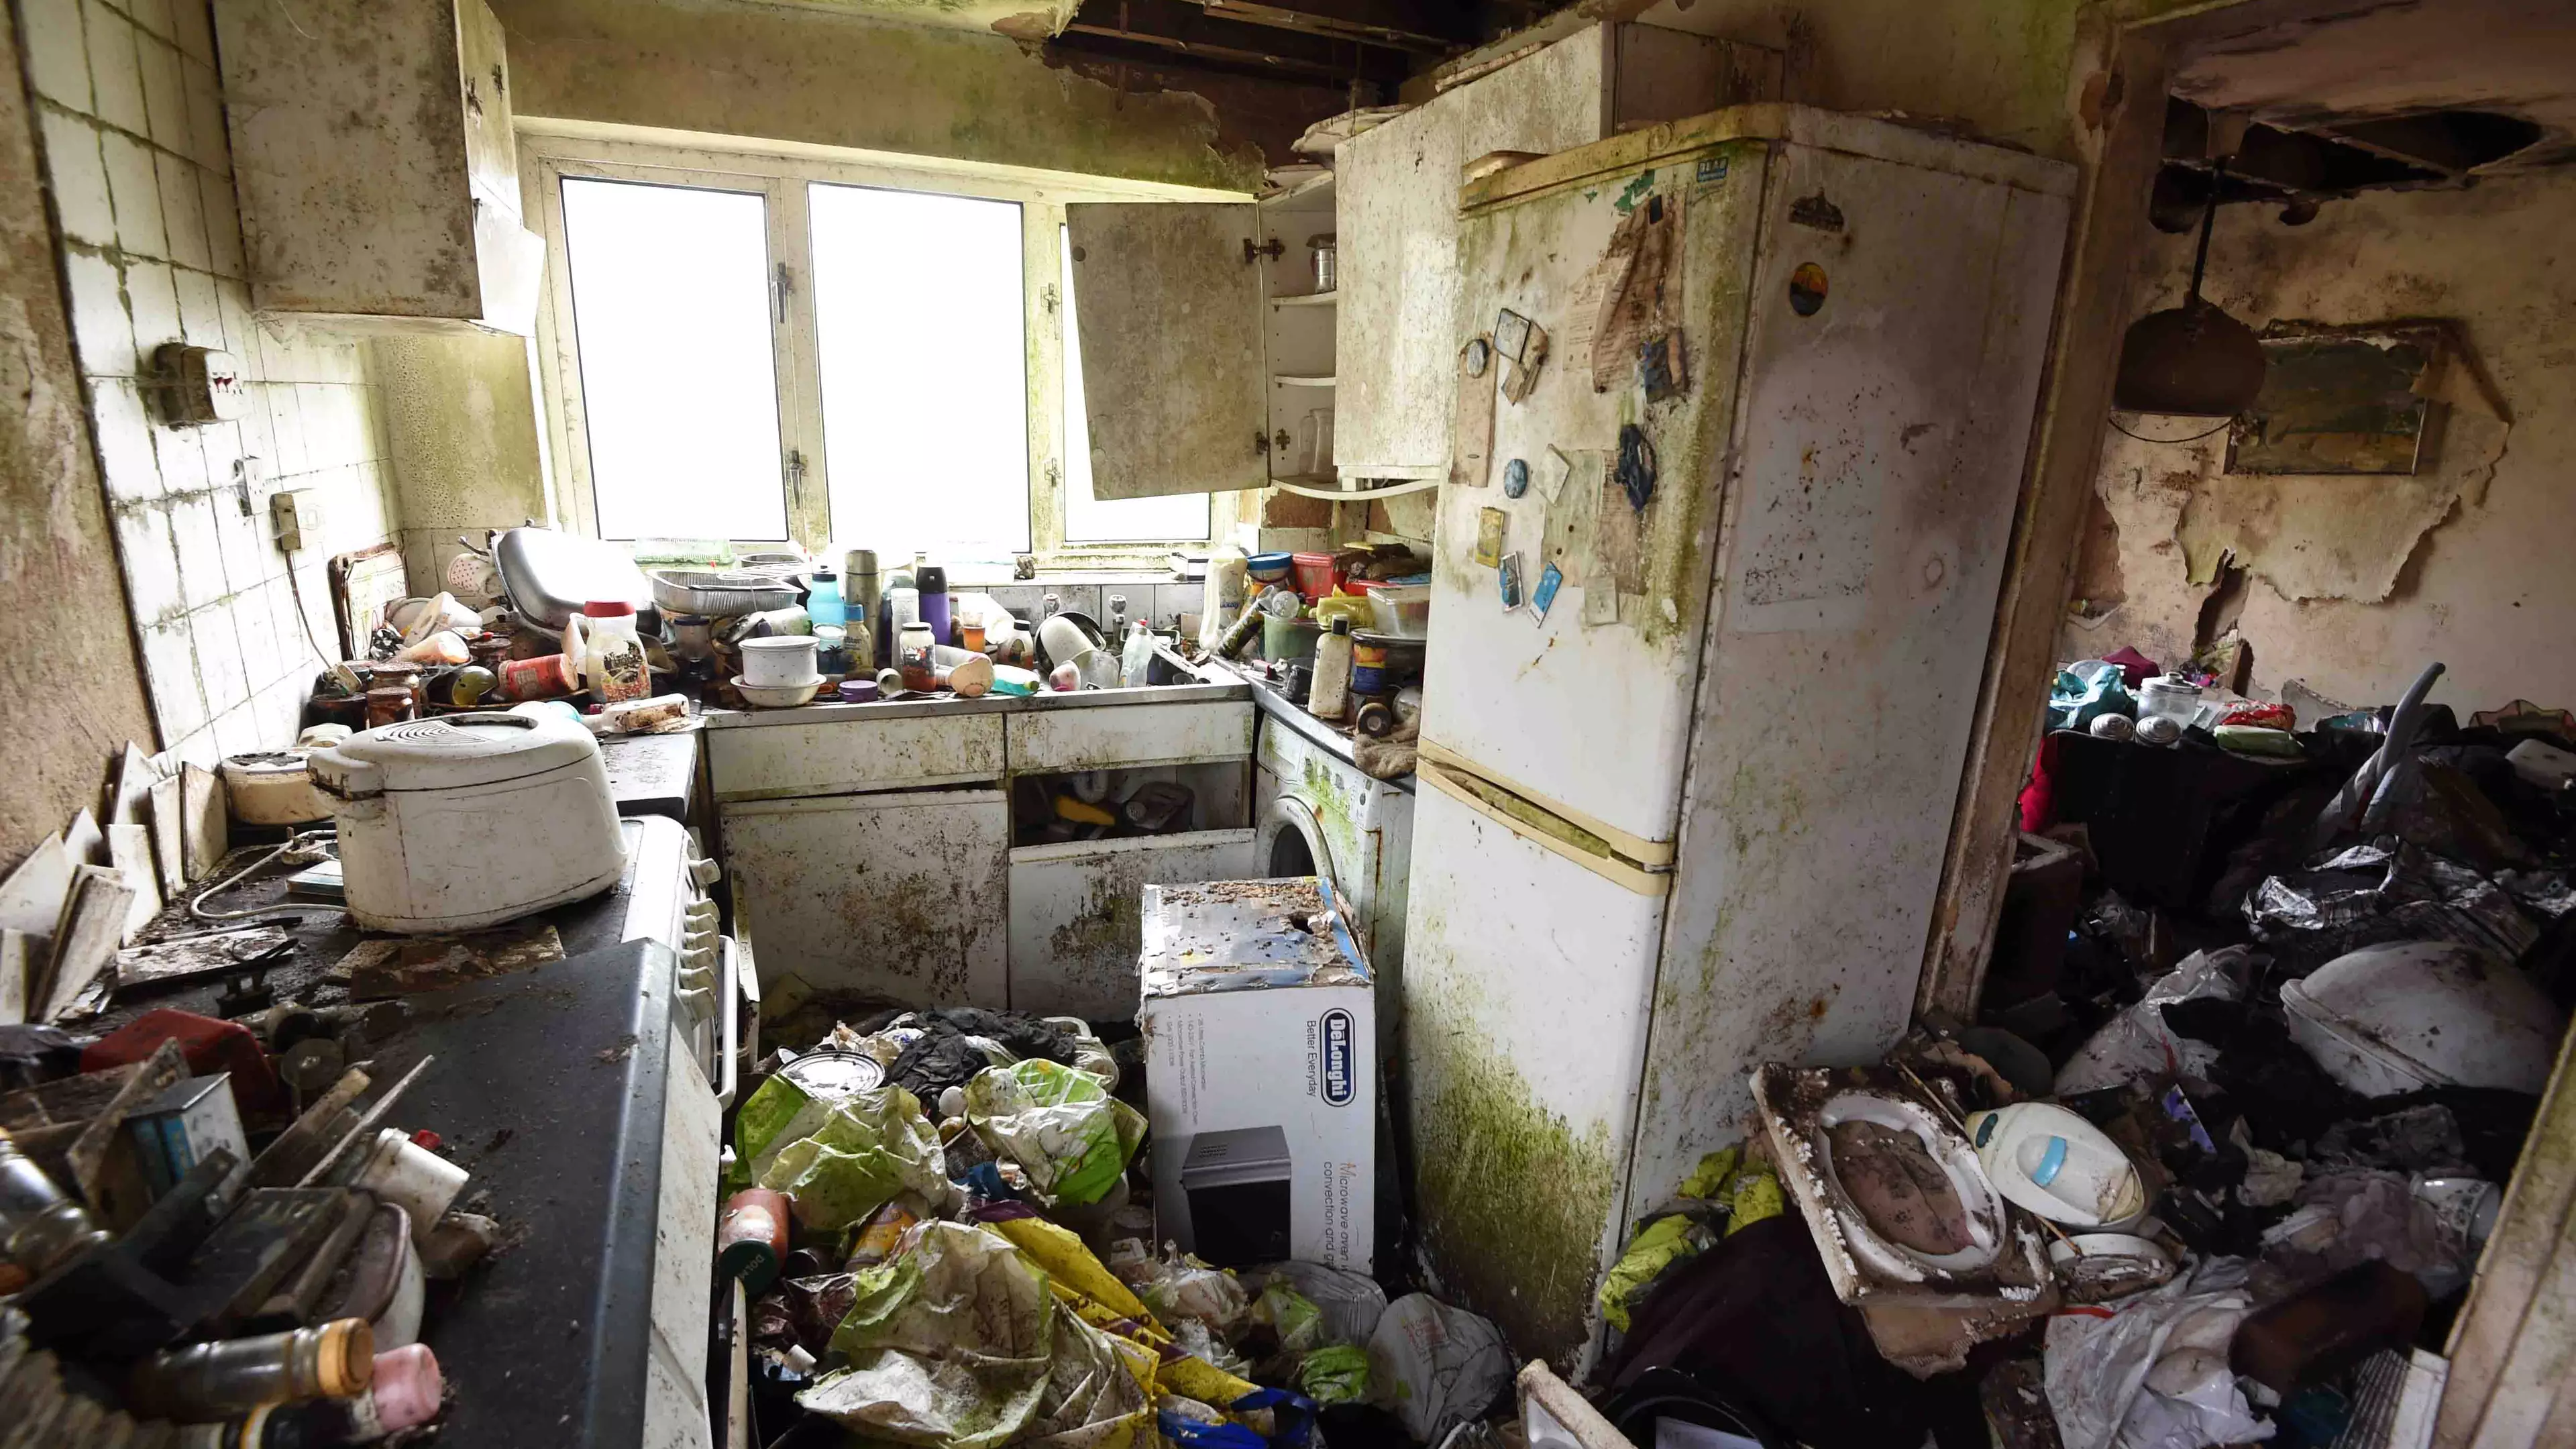 Disgusting Hoarder House Riddled With Rats Transformed Into 'Absolute Palace'